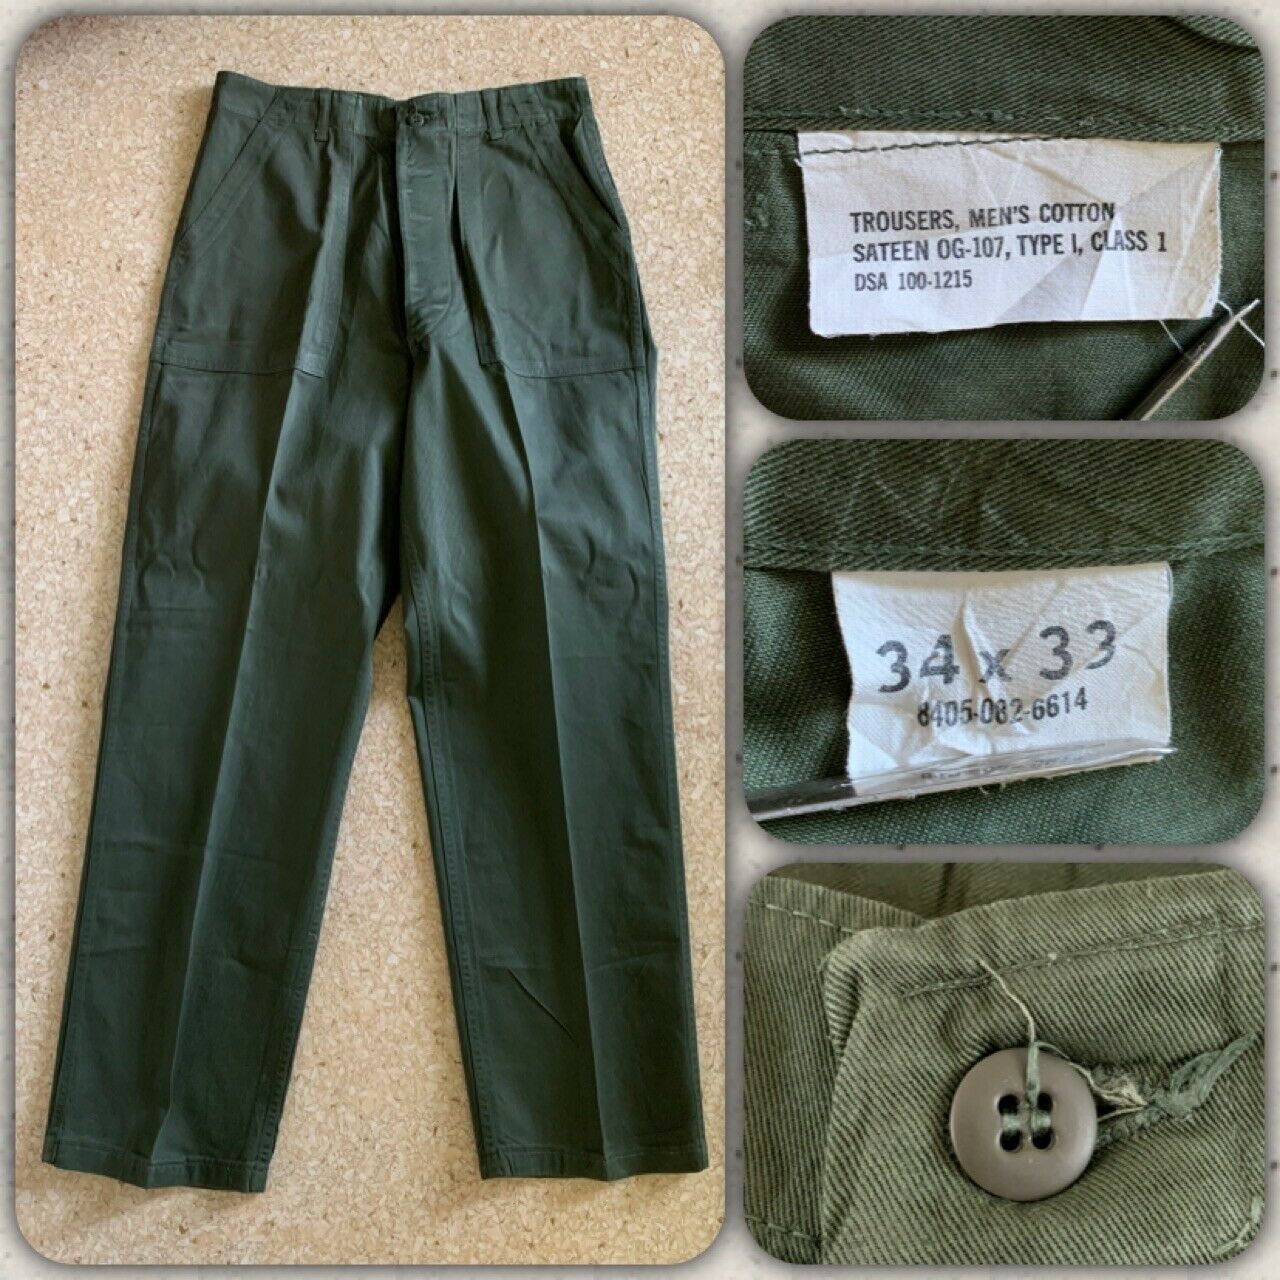 Vtg 60s Cotton Sateen Og-107 Trousers 34 / 33 X 33 Military Us Army Pants